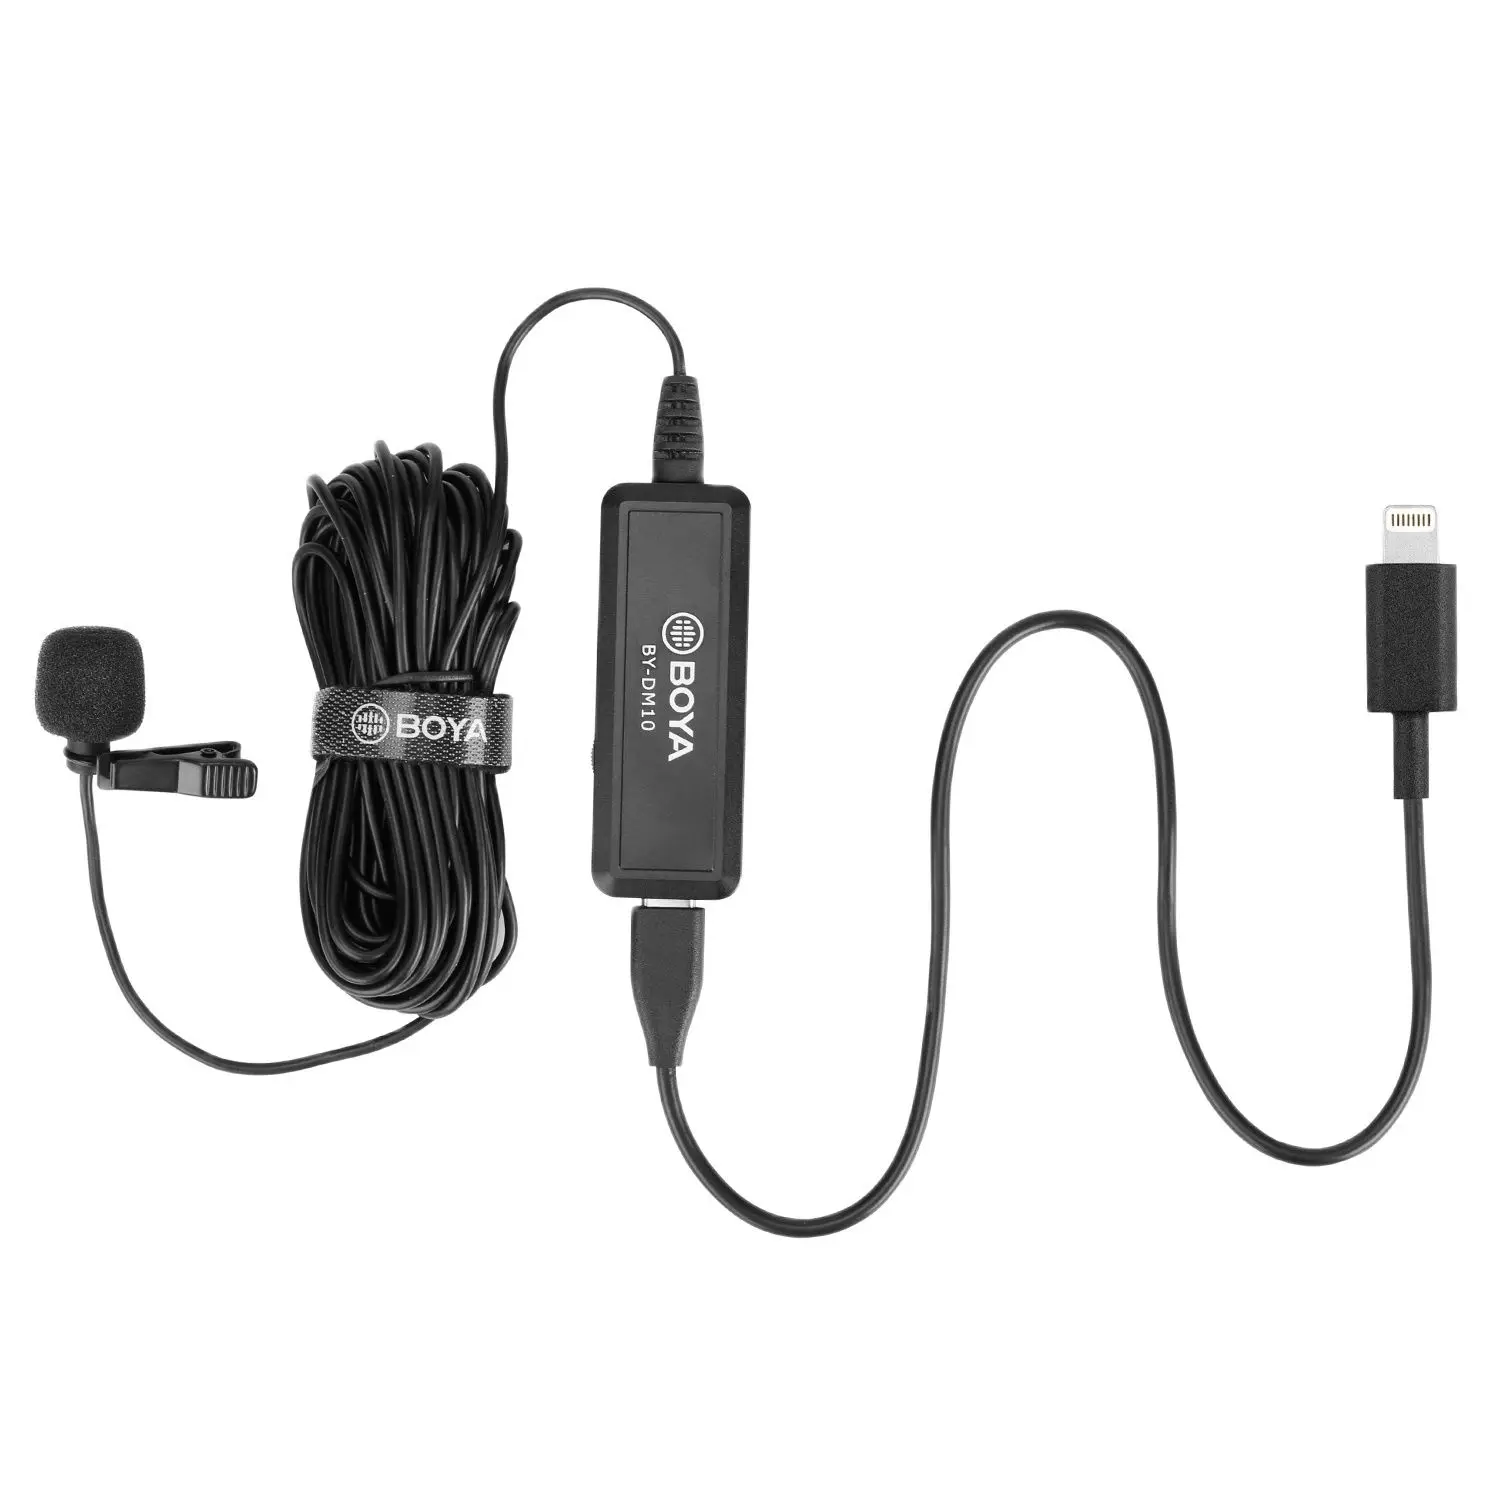 

BOYA BY-DM10 Didital Lavalier Microphone for iOS Android MAC Windows Computer with Lightning USB Cable Vlog Record Youtube Video